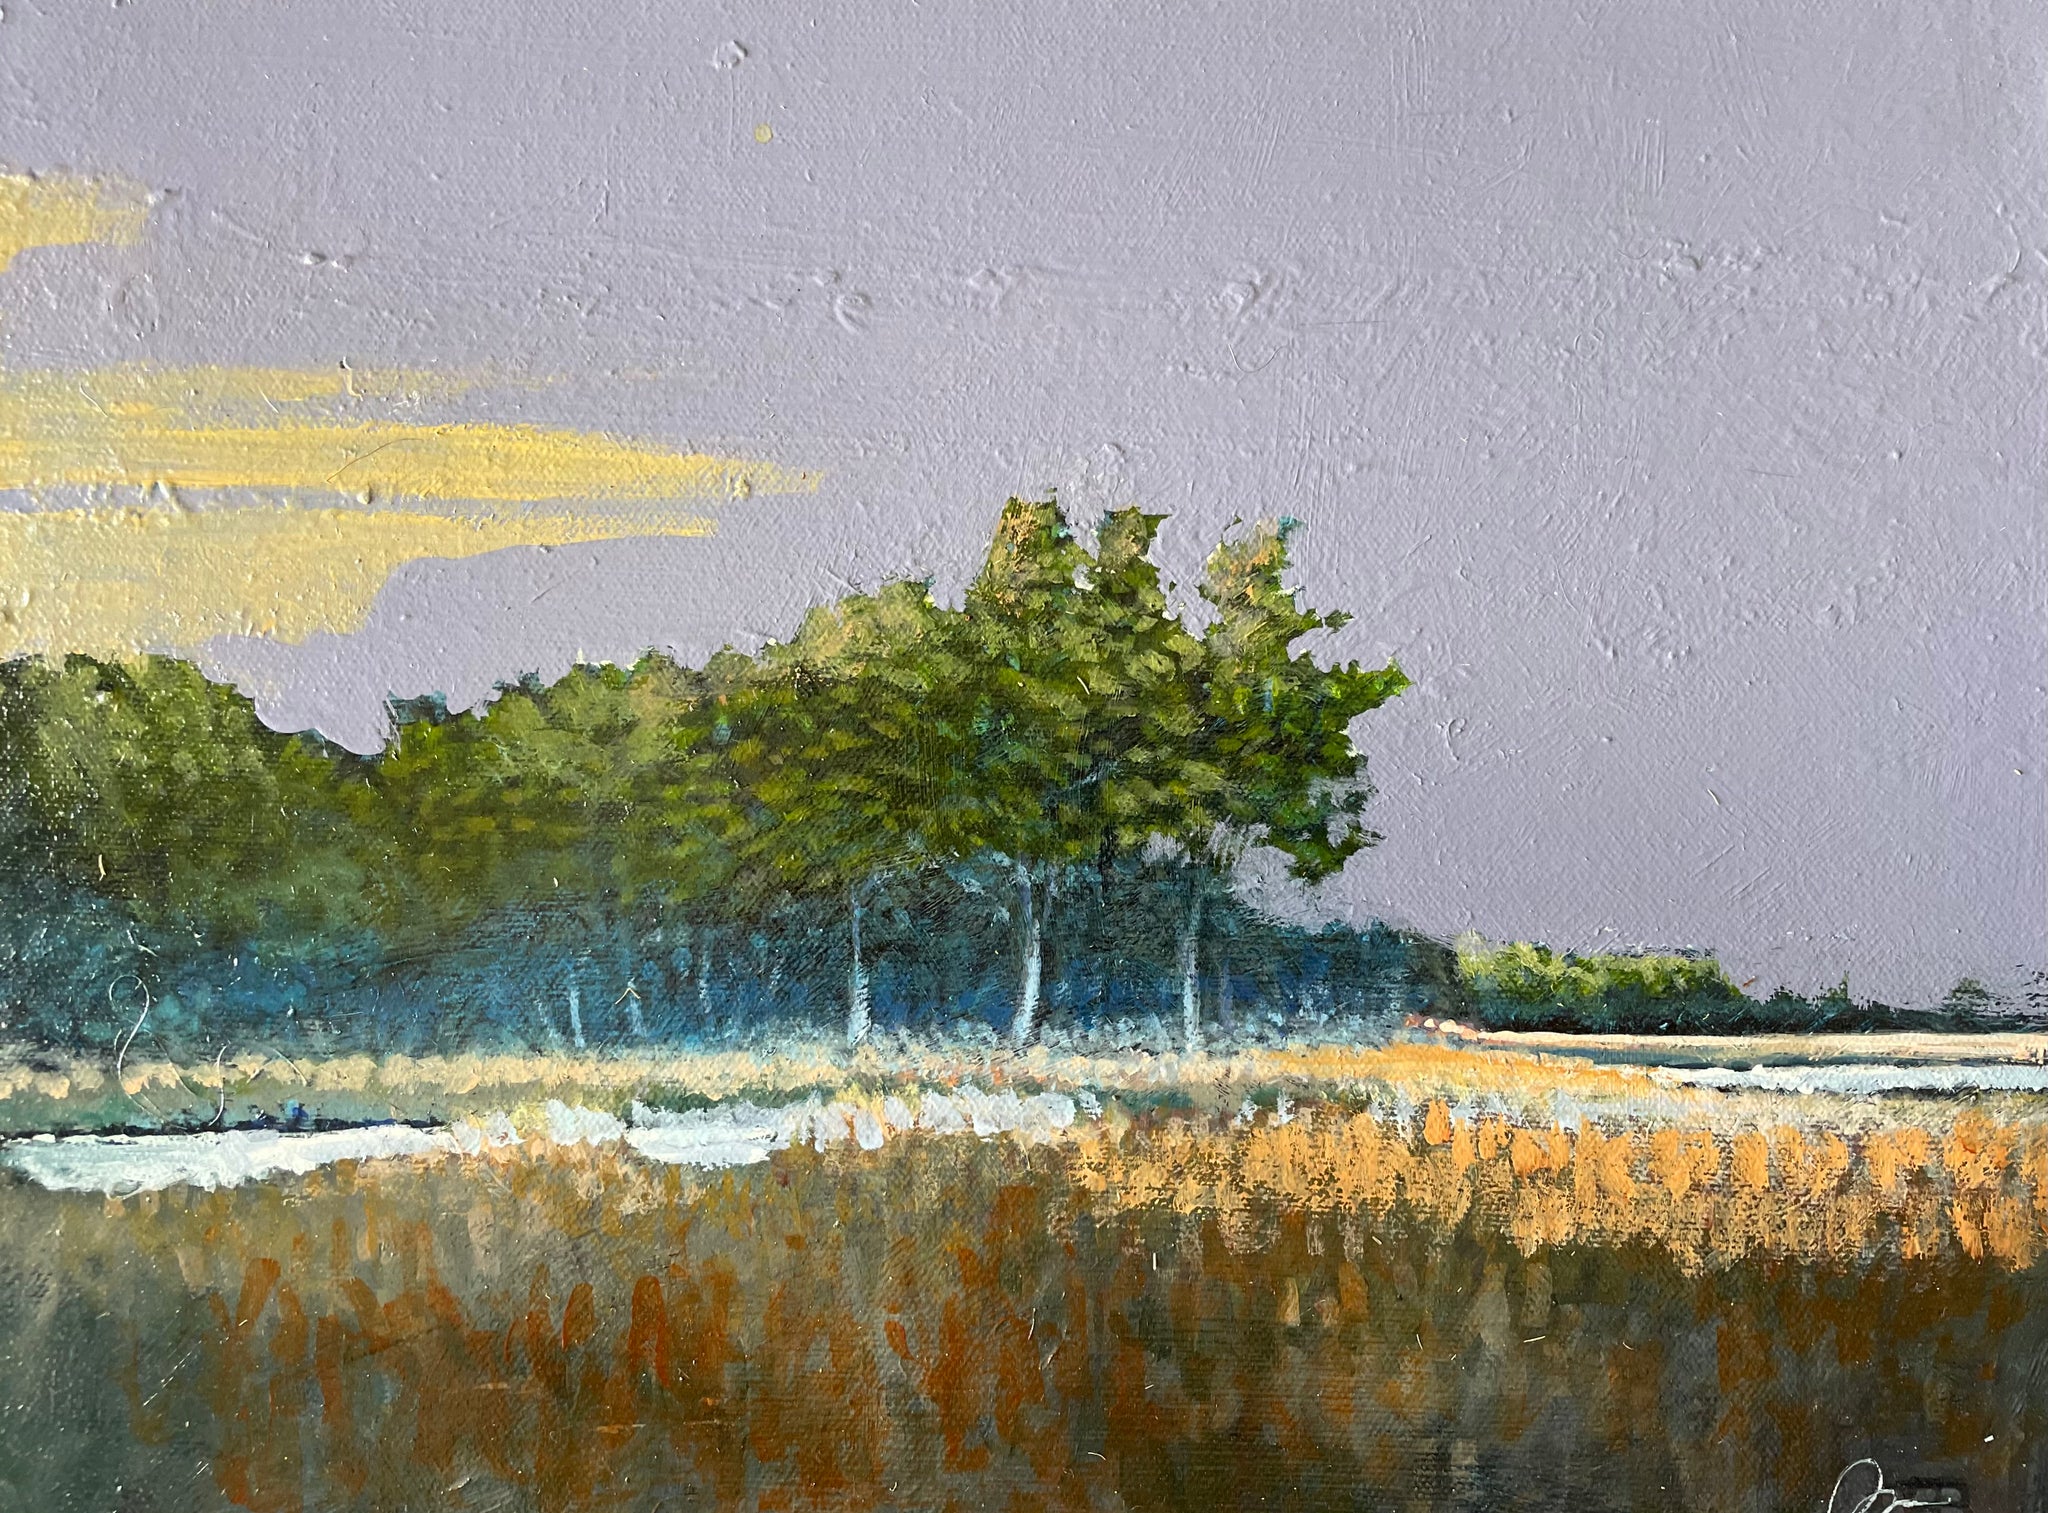 Forested Island on Ashepoo Rice Field 11 X 14"